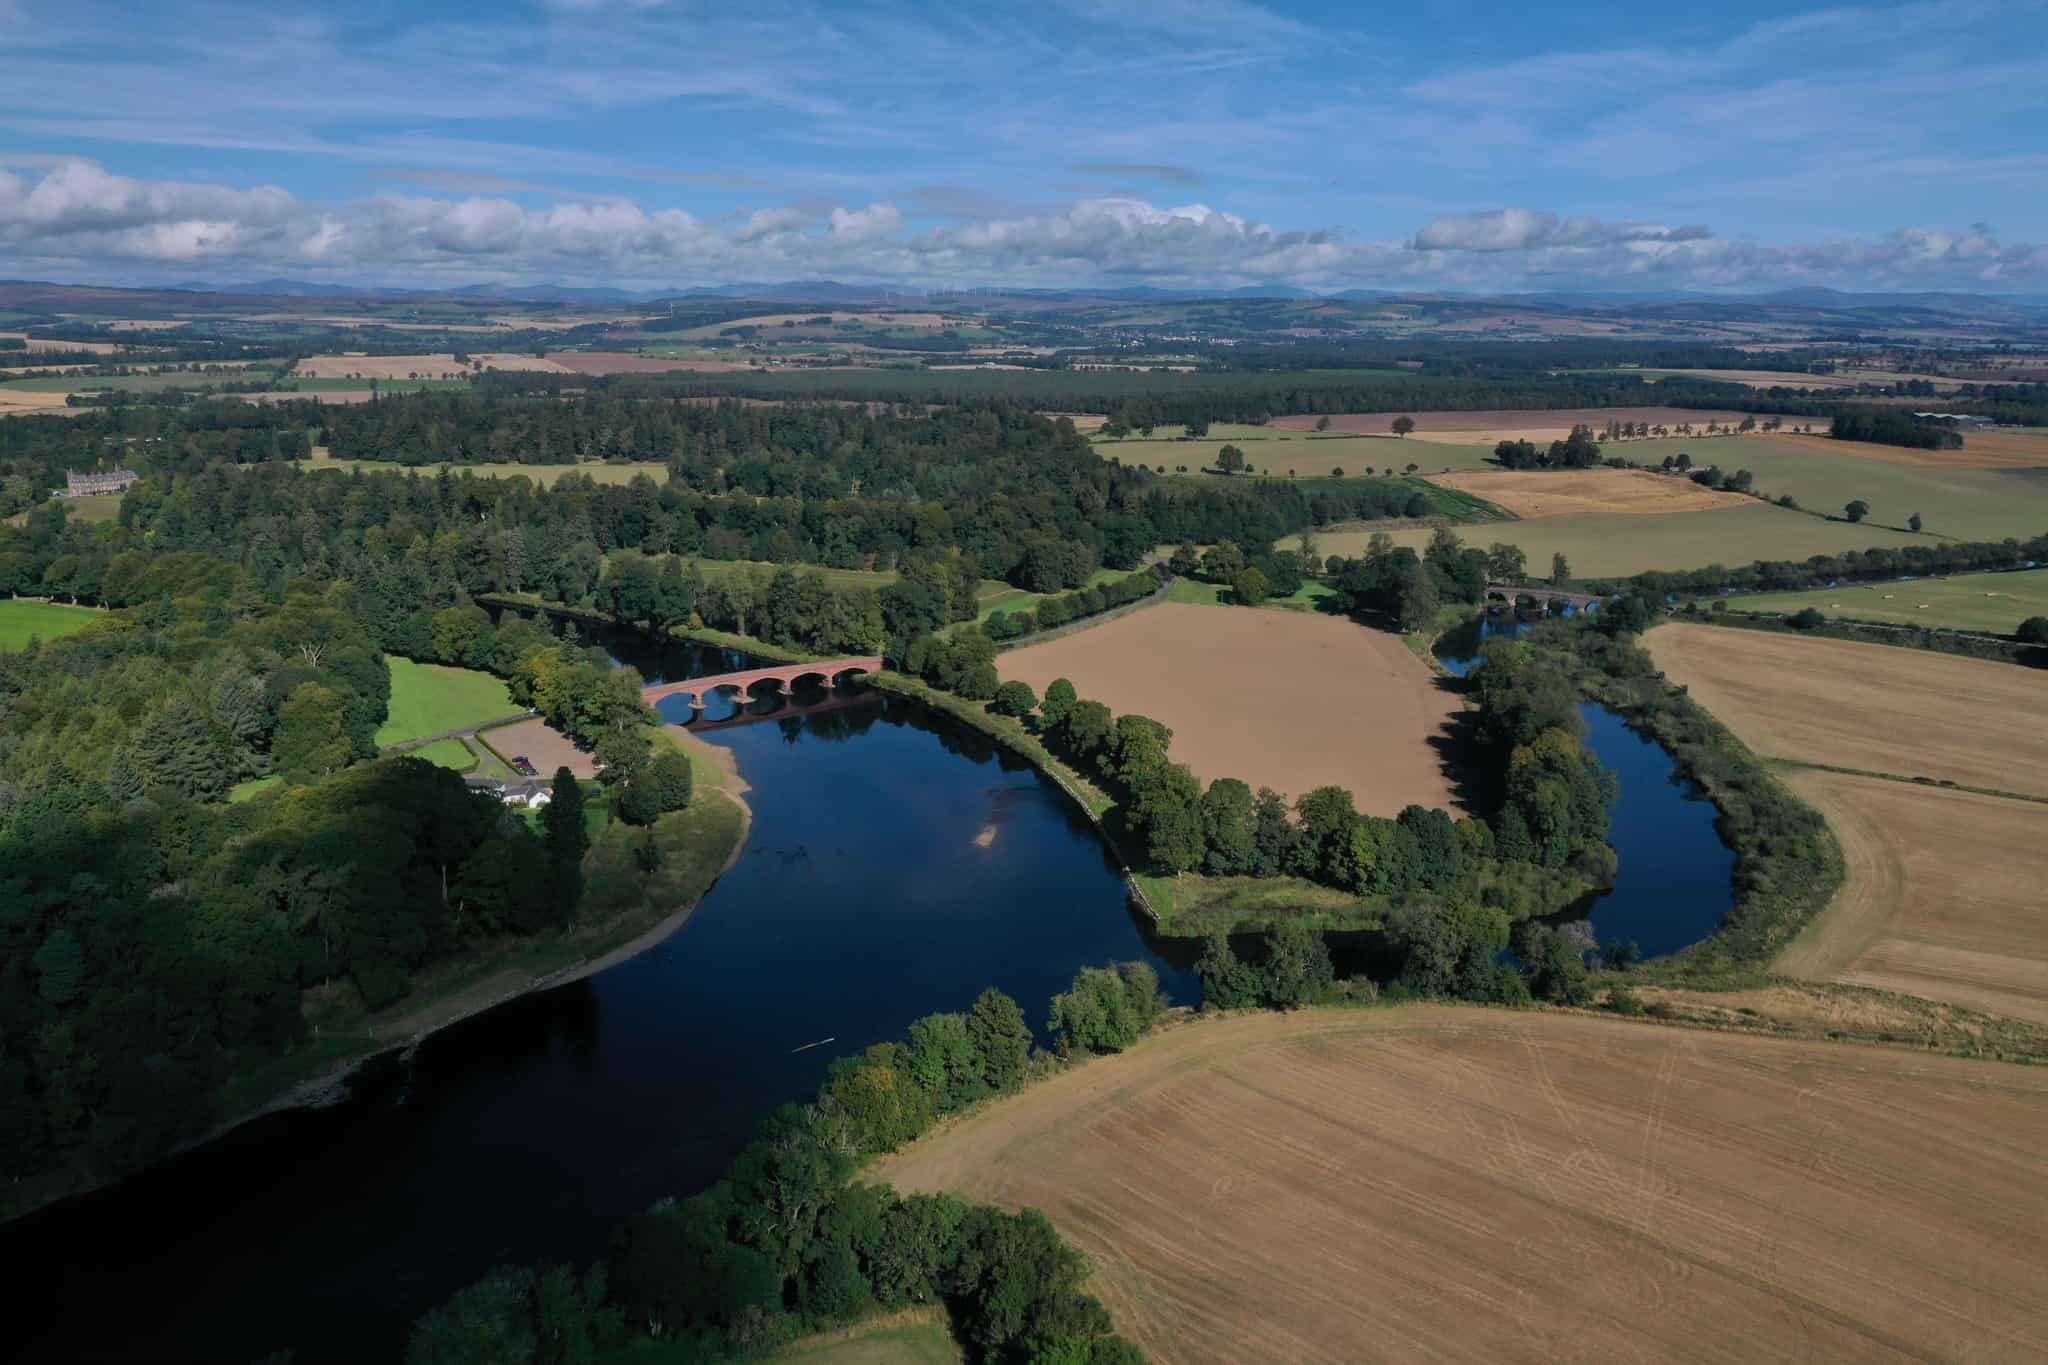 Best Salmon Fishing in Scotland – Our Thoughts